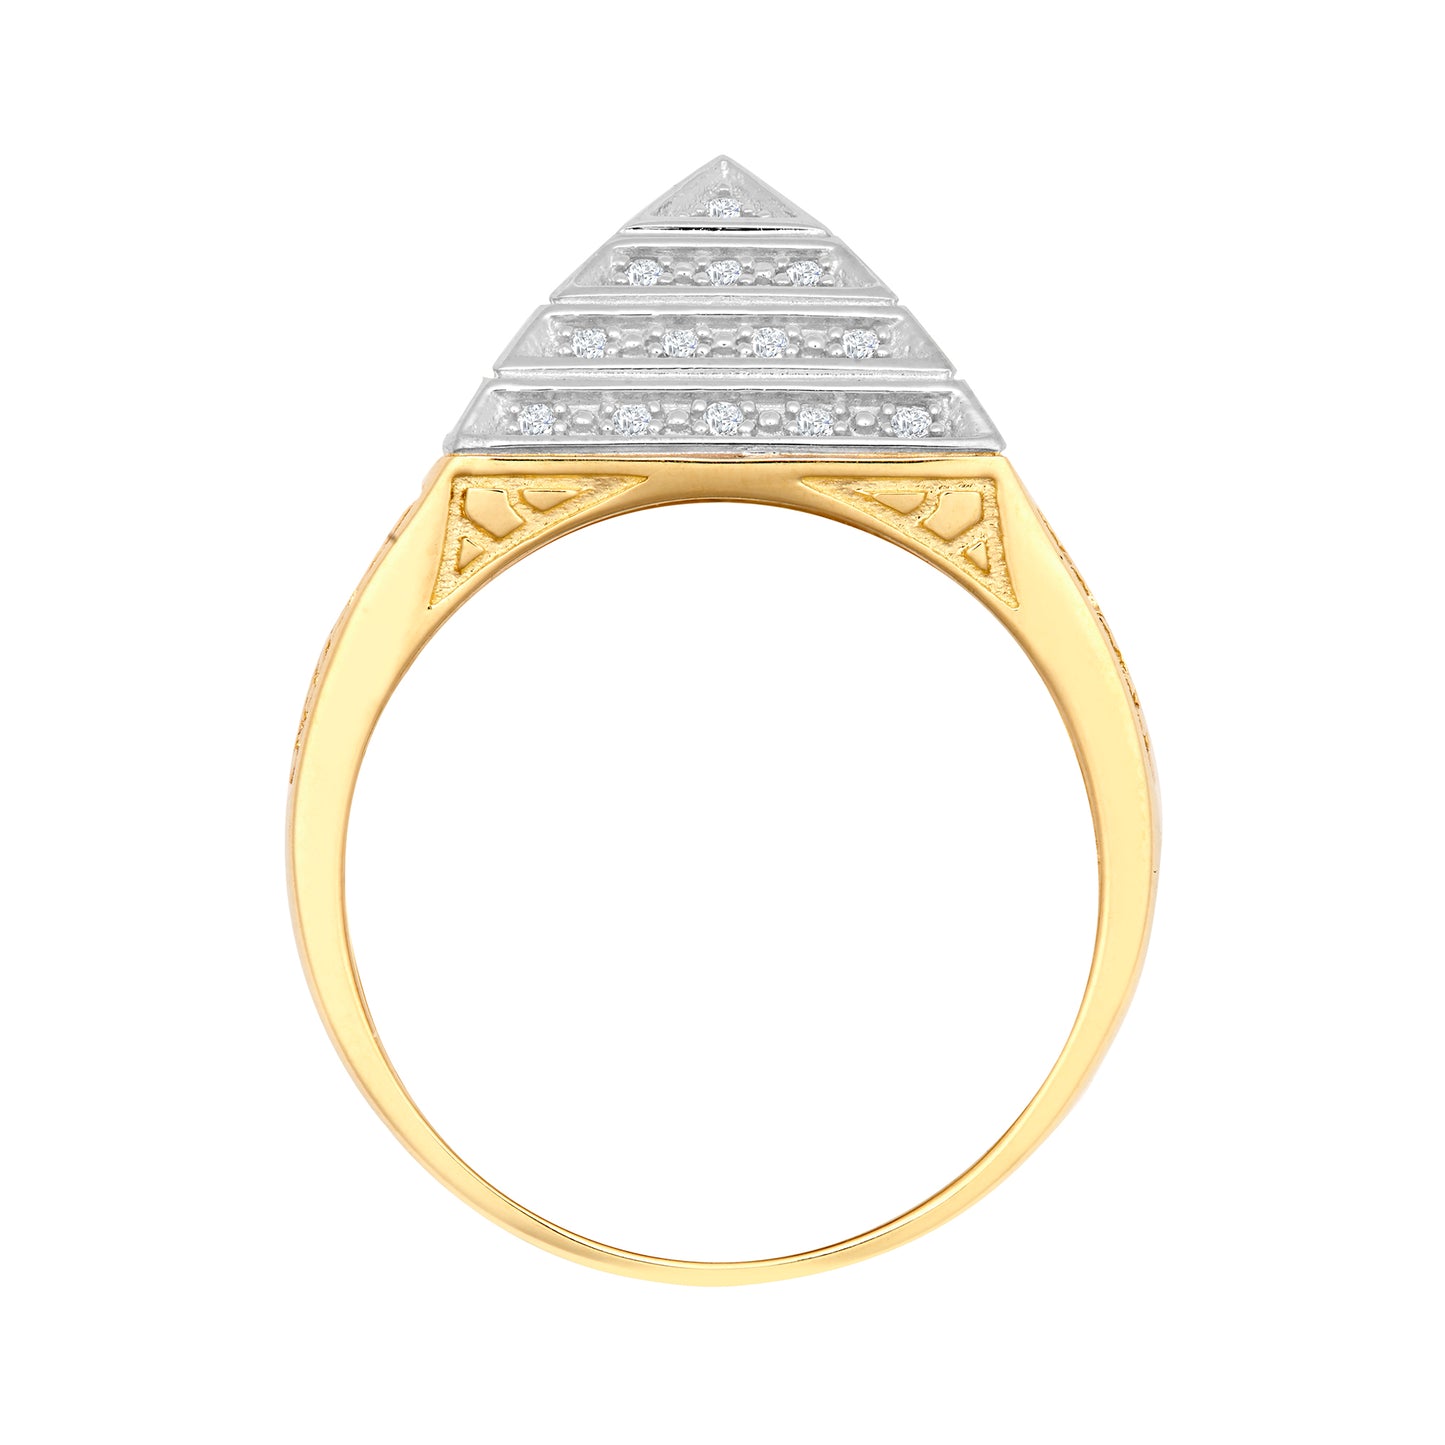 9ct 2-Colour Gold  CZ Egyptian Pyramid 1/4oz 15mm Signet Ring - JRN578